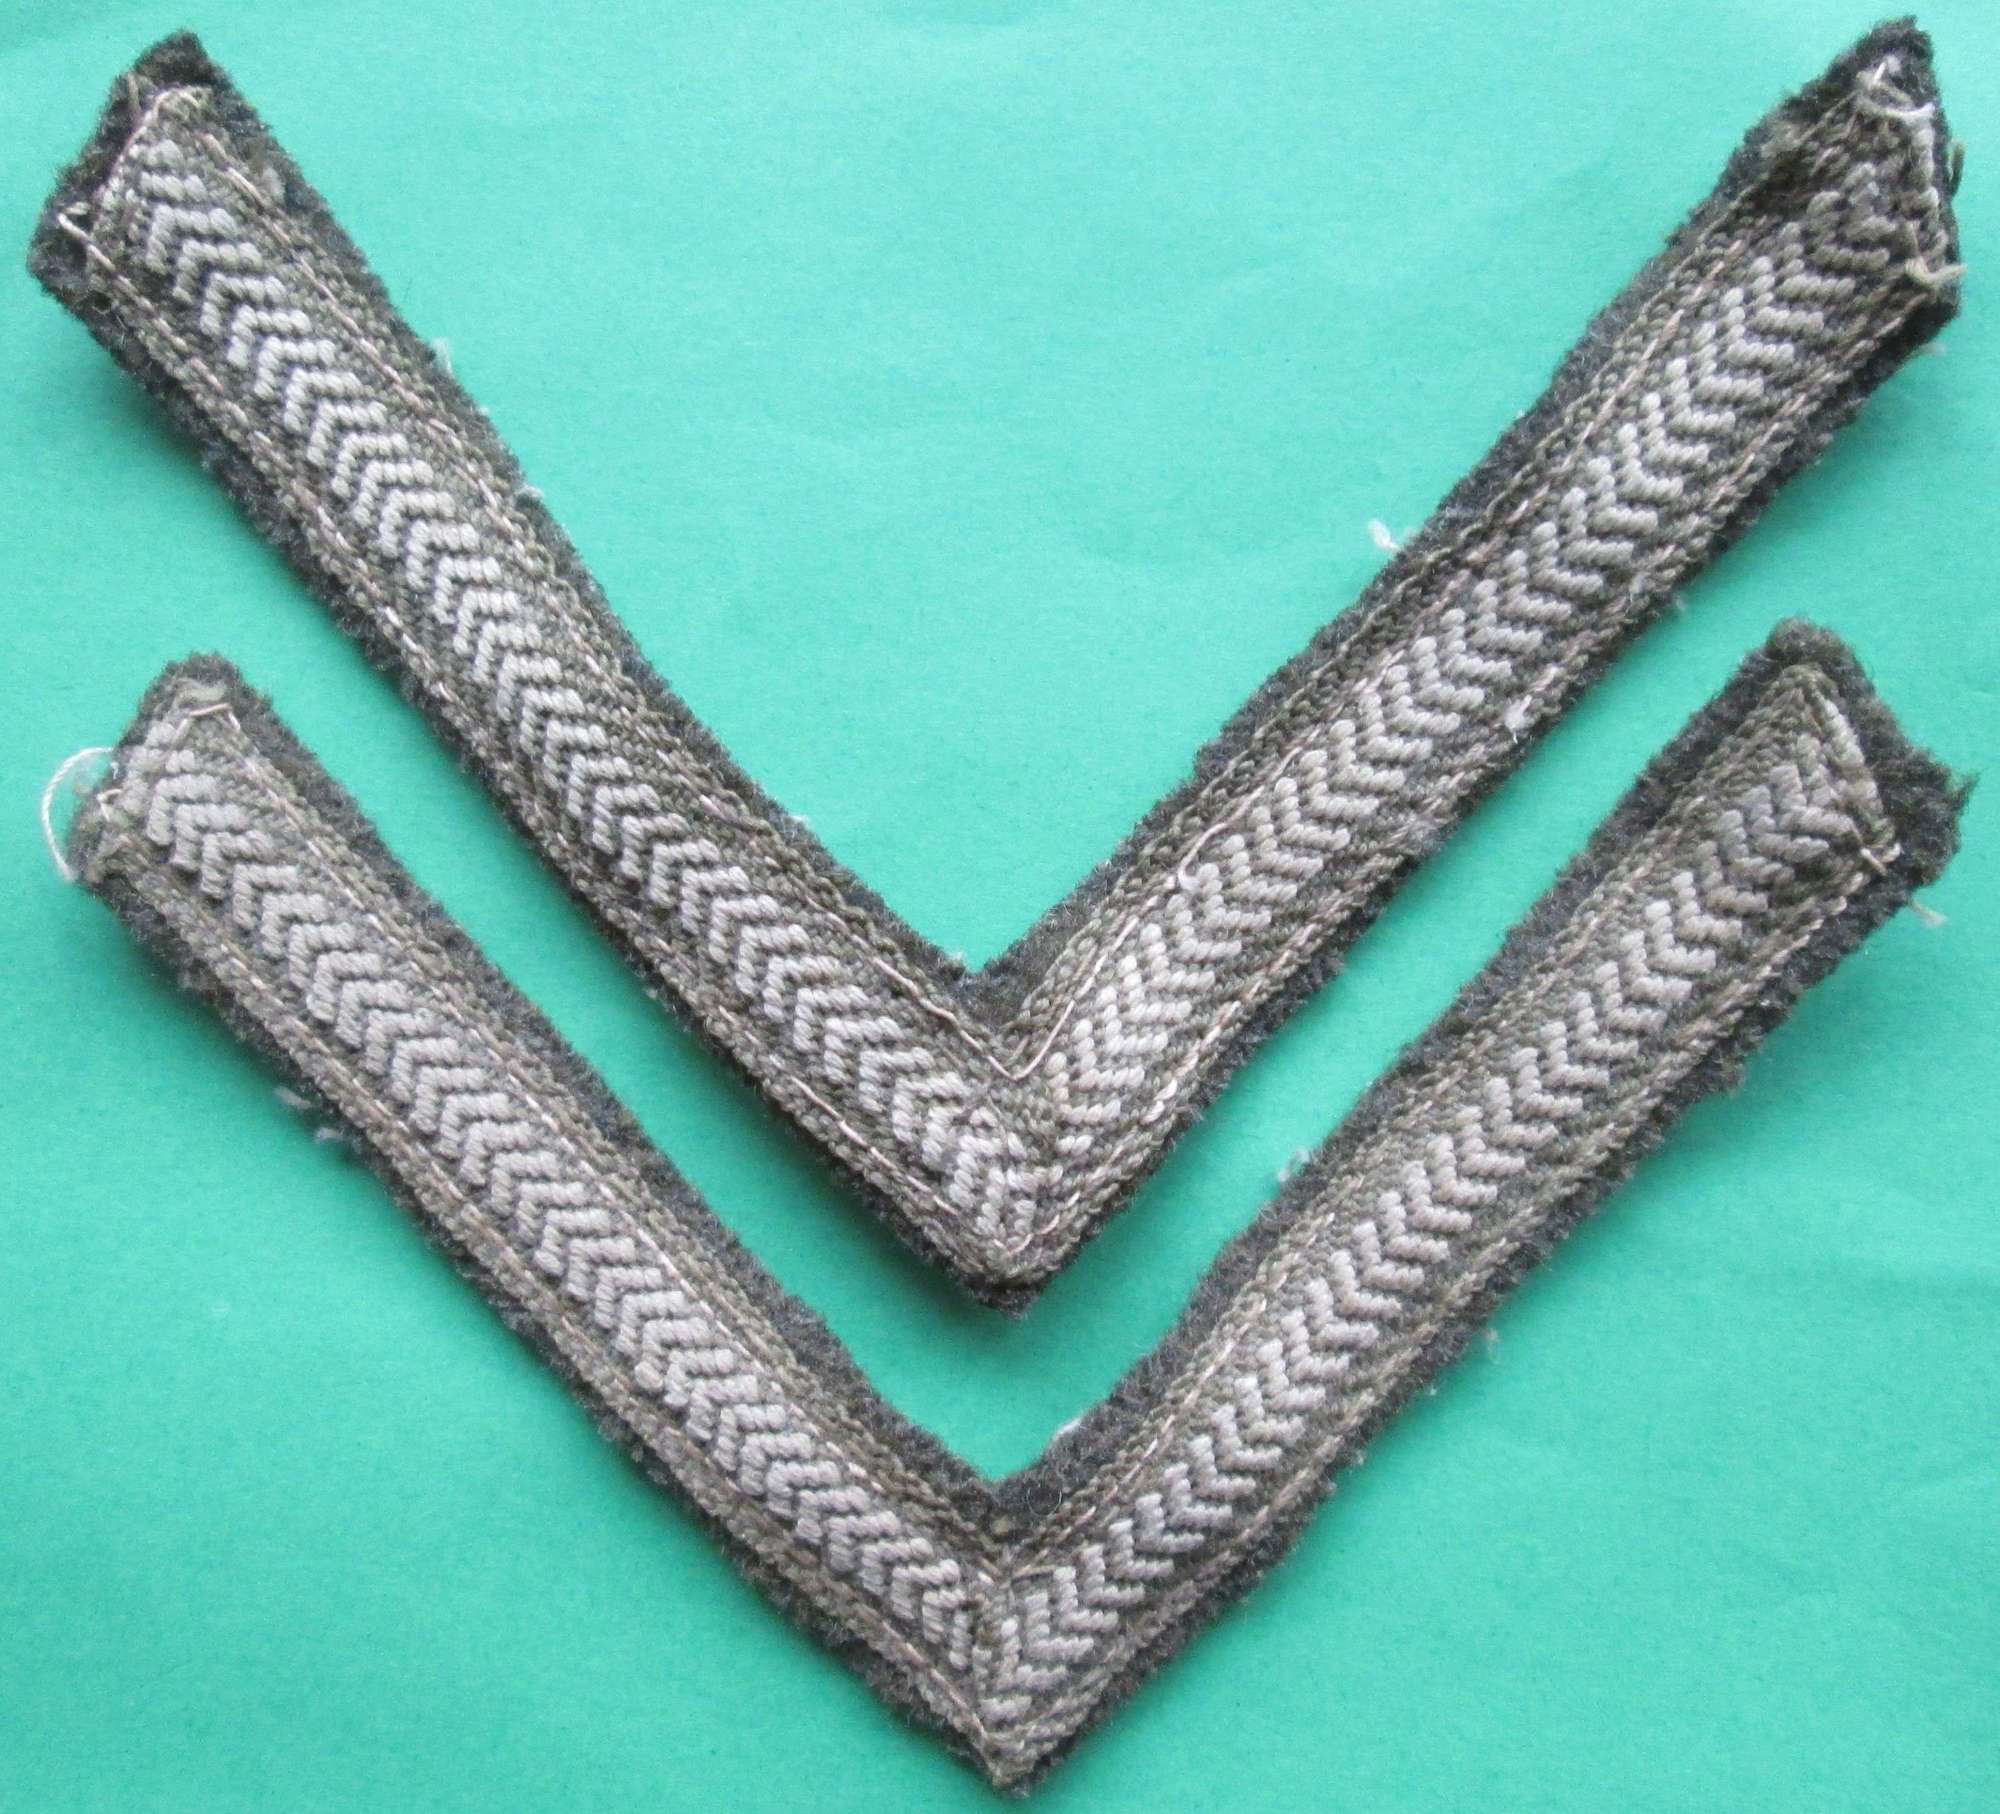 A PAIR OF LANCE-CORPORAL STRIPES